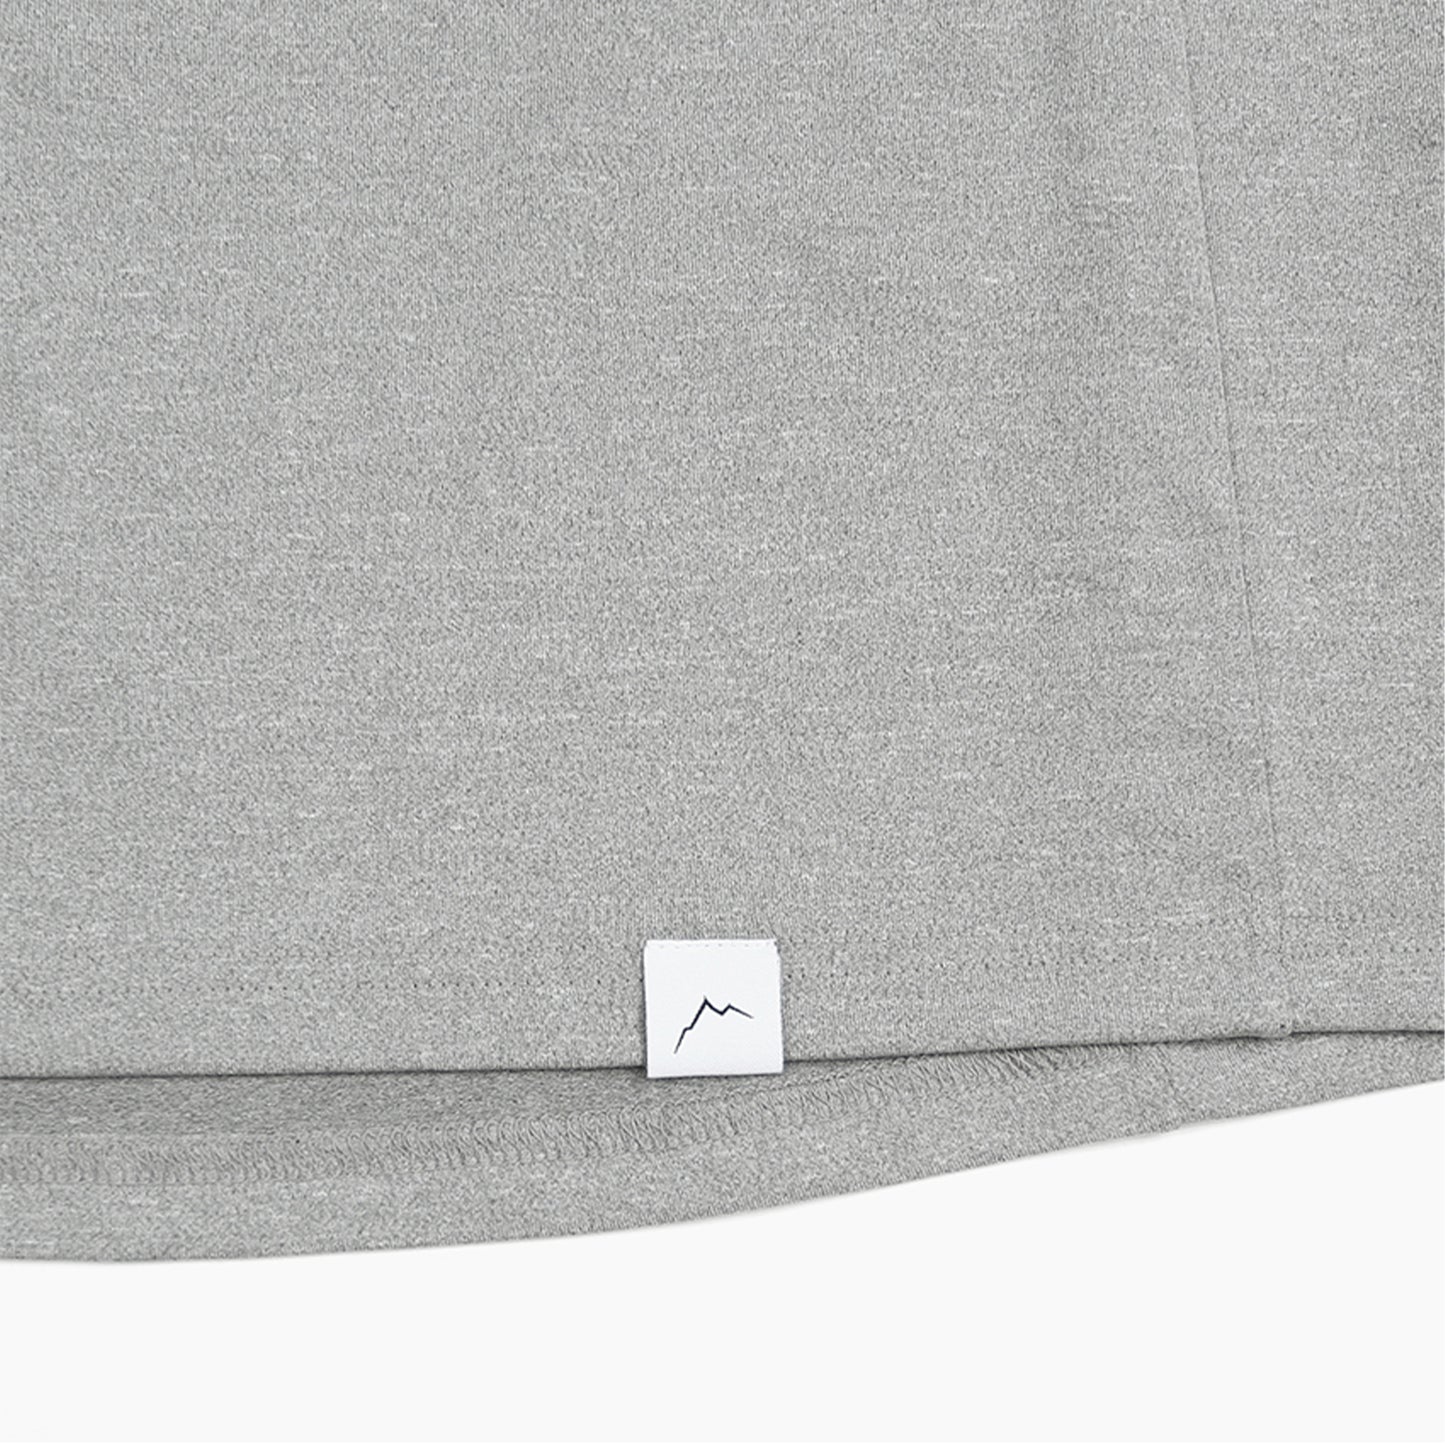 CAYL Trail Happiness - Short Sleeve Tee